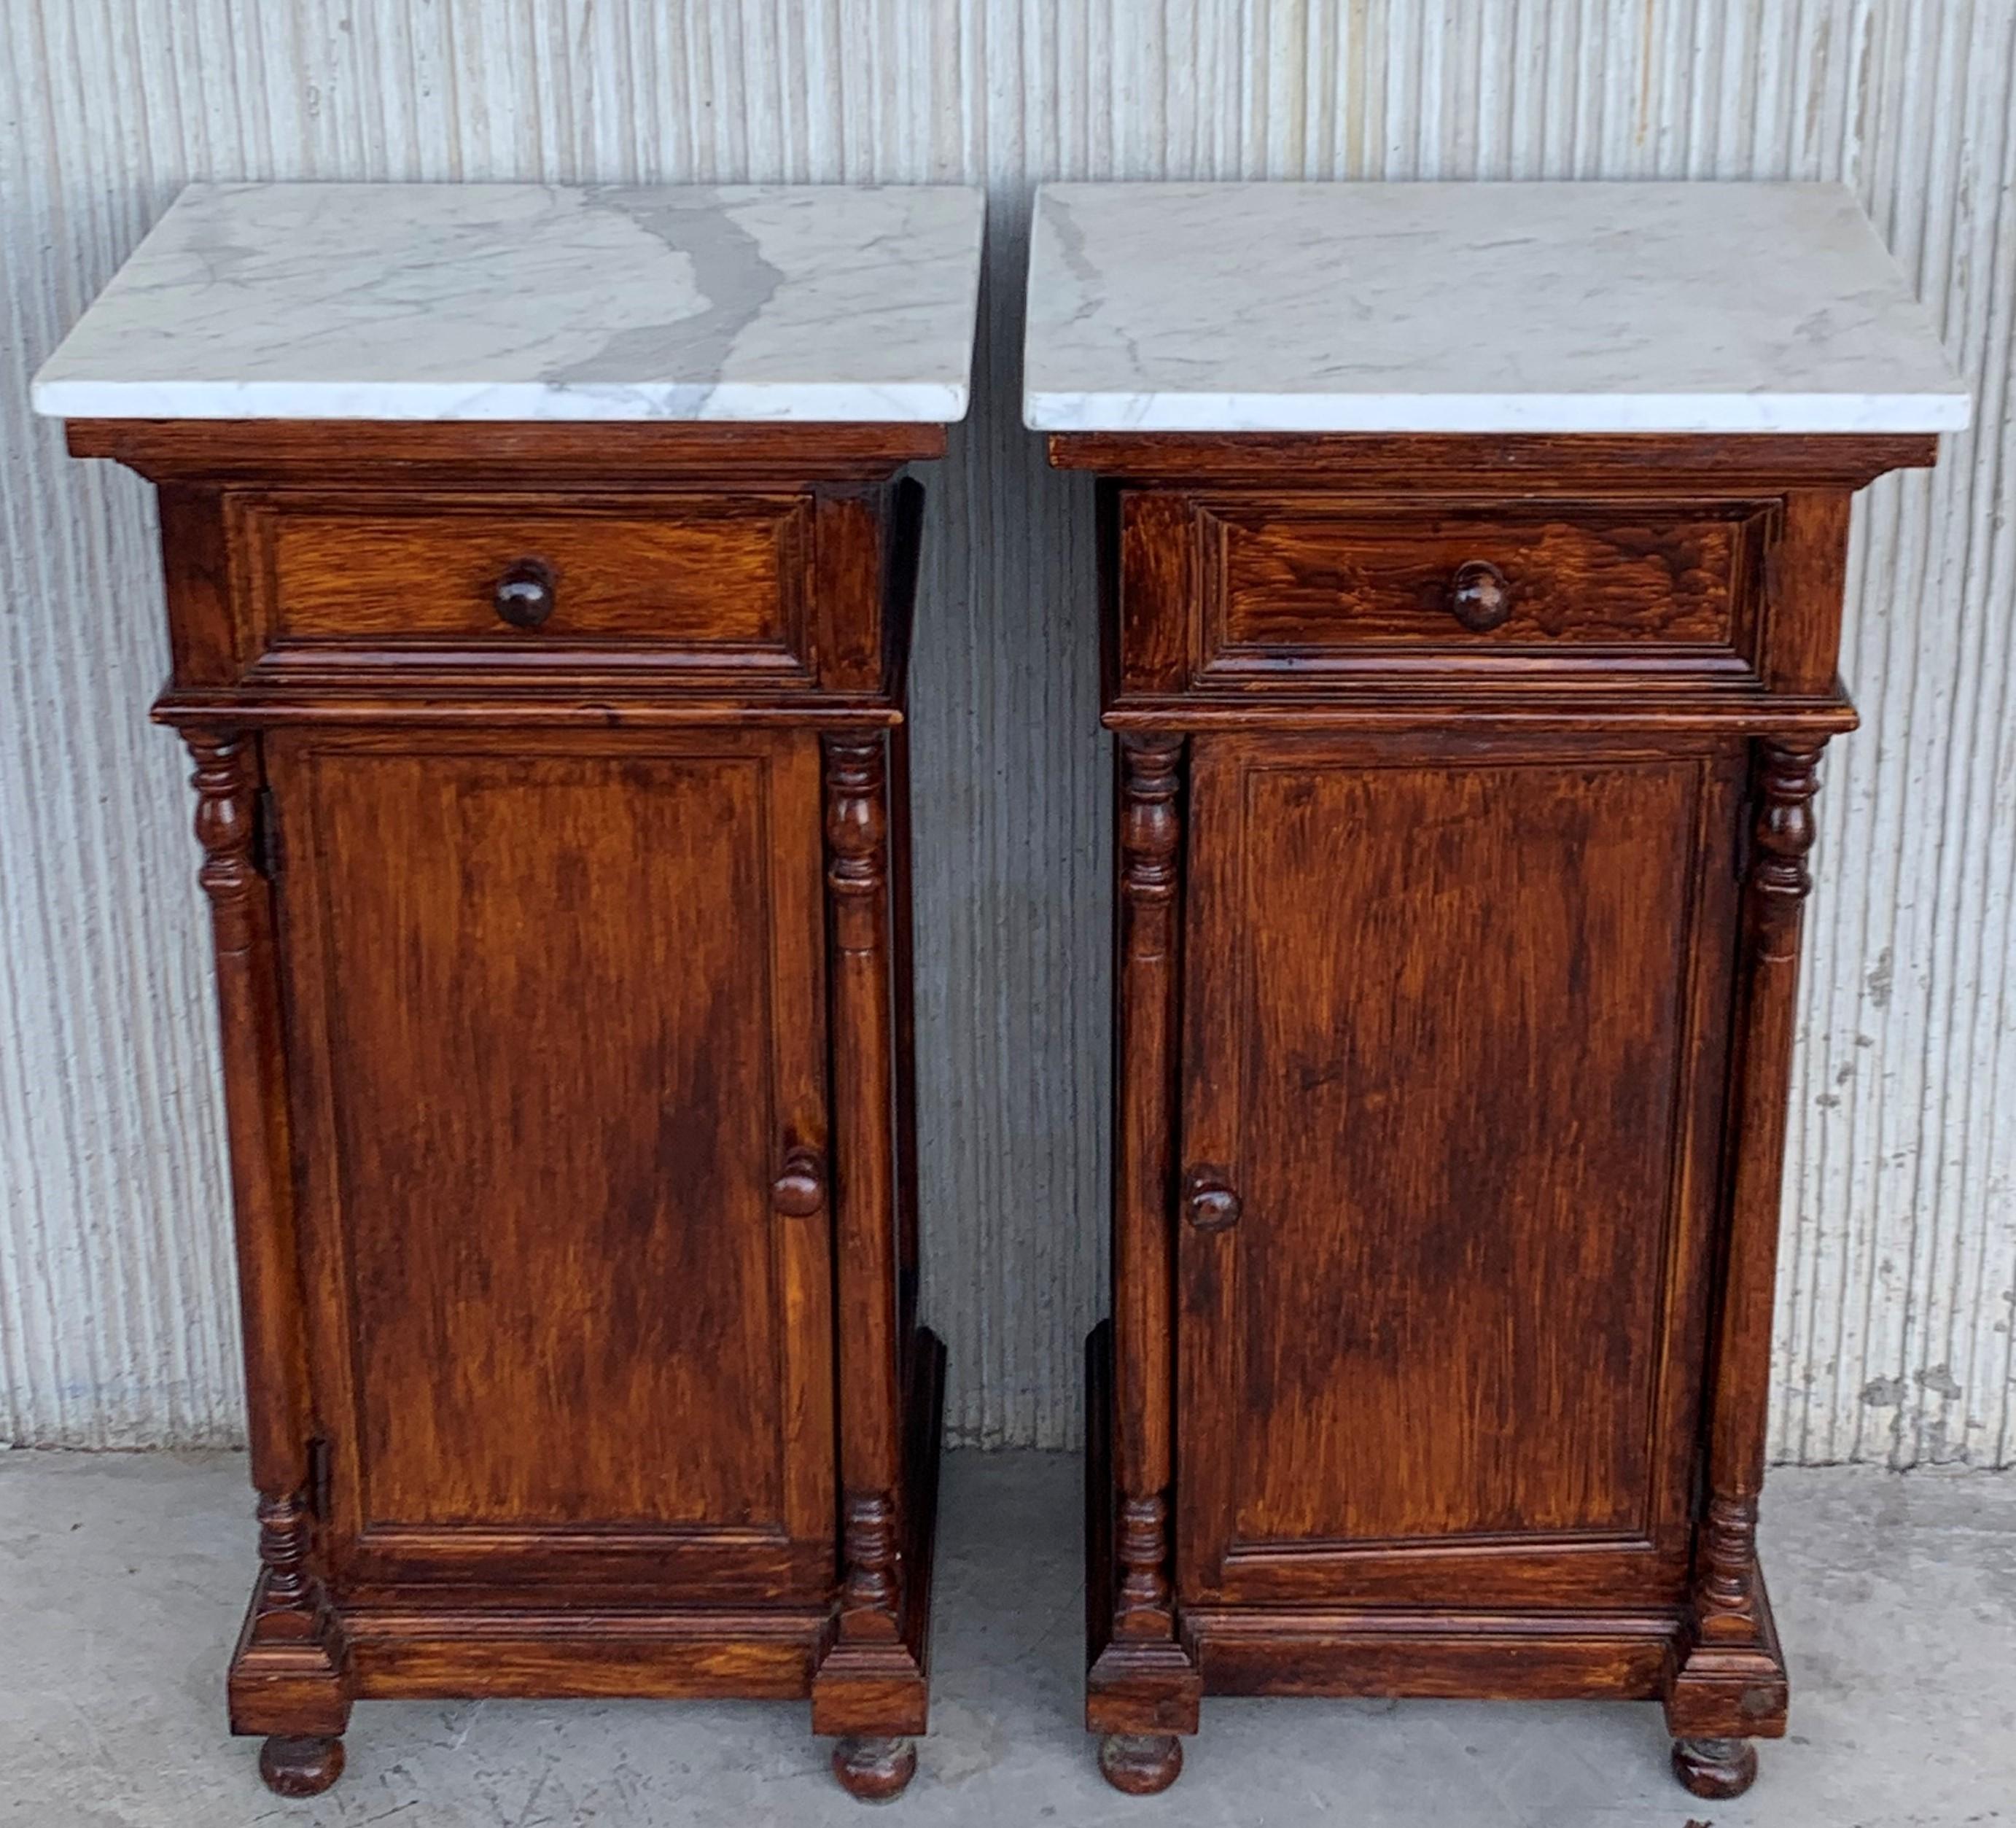 Pair of antique Biedermeier style bedside cabinets, late 19th-early 20th century, possibly French or Spanish, each in oblong rectangular form, the marble atop a fabric-lined surface, over a conforming case fitted with a single drawer over a cabinet